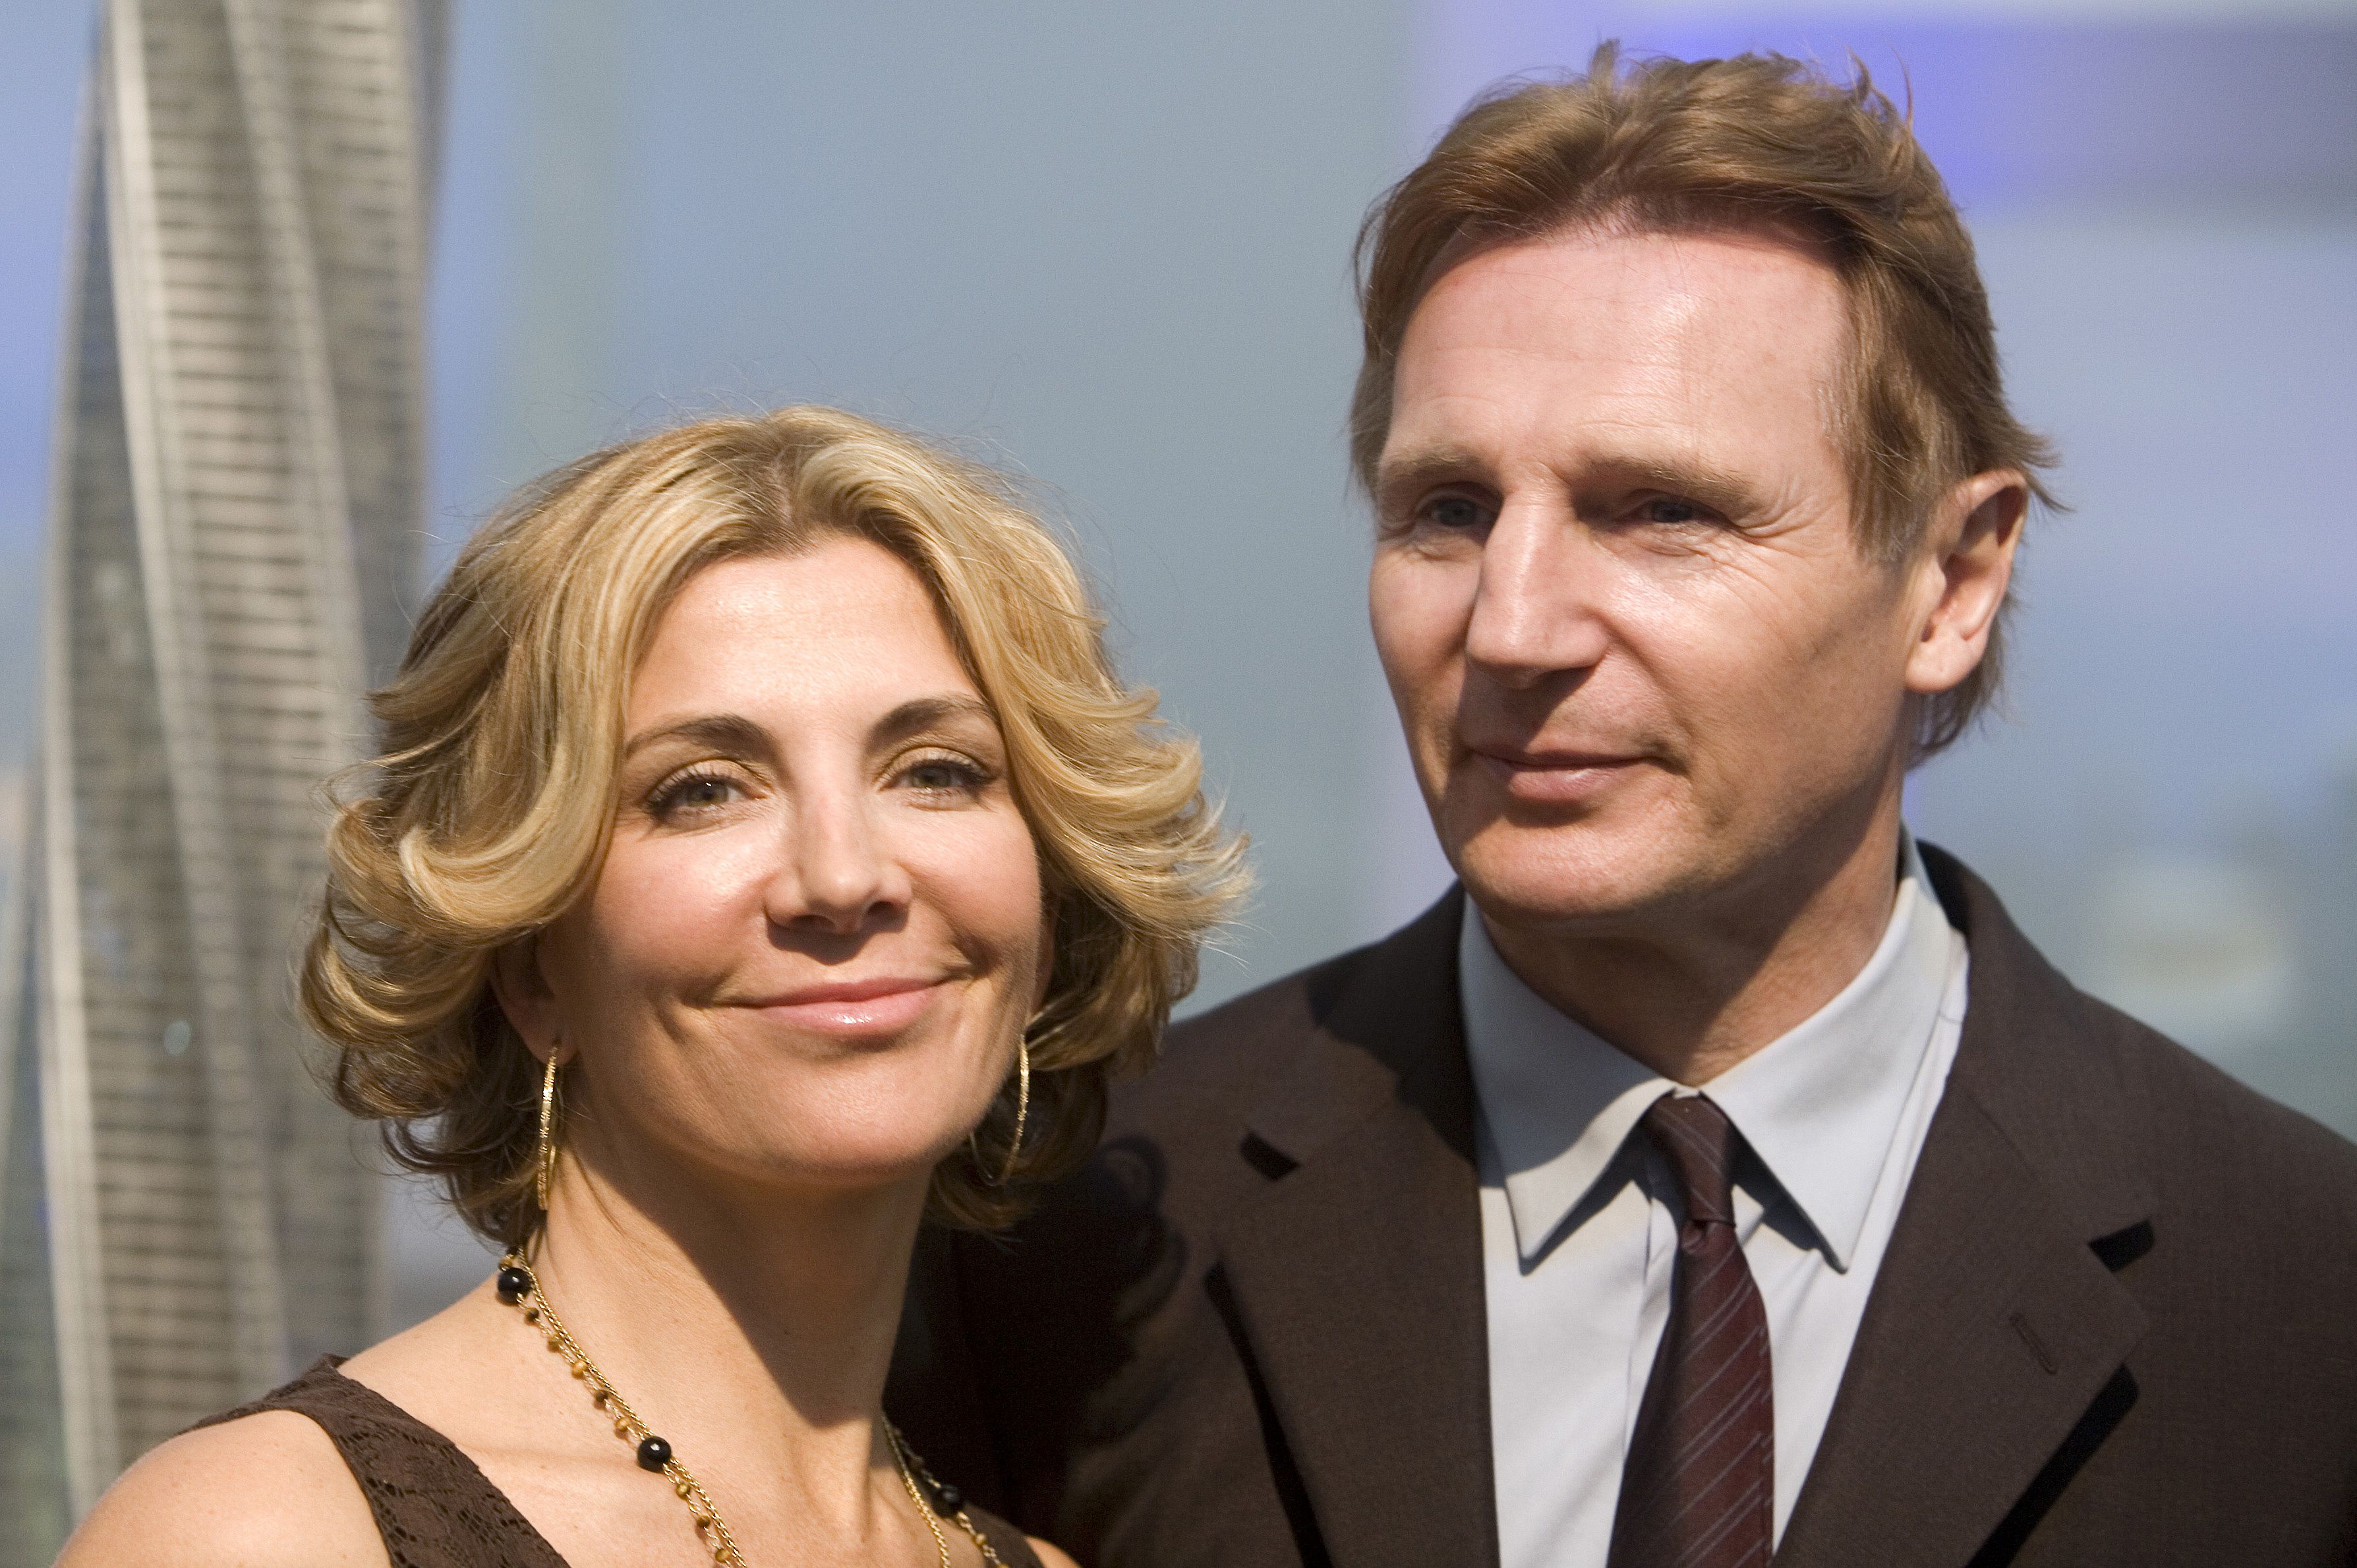 <p><span>After almost 15 years of marriage, Liam Neeson became a widower when his wife, actress Natasha Richardson, died on March 18, 2009, after sustaining a head injury in ski accident in Canada. The mother of two was 45 when she died. "That's the weird thing about grief. You can't prepare for it. You think you're gonna cry and get it over with. You make those plans, but they never work," Liam told Esquire in 2011. "It hits you in the middle of the night — well, it hits me in the middle of the night. I'm out walking. I'm feeling quite content. And it's like suddenly, boom. It's like you've just done that in your chest."</span></p><p>On the 15th anniversary of his mother's death in 2024, Daniel Neeson — the younger of Liam and Natasha's two sons — took to Instagram to honor Natasha. "15 years since you've left this plane onto forever more. I look forward to reuniting one day but for now I take solace in knowing you're beside me every step of the way," he captioned a <a href="https://www.instagram.com/p/C4rGUeFrY56/?hl=en">photo</a> of his mom. "Hopefully, I'm making you proud. I think you would definitely be proud of my margarita skills. She was the OG margarita mama! As a kid, I used to ask her for a sip of hers, and she would gently say not till you're older. Little did she know I would one day start my own tequila brand and have way too many margaritas at my fingertips."</p><p>Daniel continued, "My aunt, @joelyrichardsonsinsta who always brightens my day, said to me this week that we sometimes forget that we're on an ever spinning planet. Change is inevitable, and we must embrace it with open arms. If you're a believer or not in quantum physics, the past, future and present coexist. We're all interconnected here and over there through love. The greatest life force. Choose it above all else."</p>